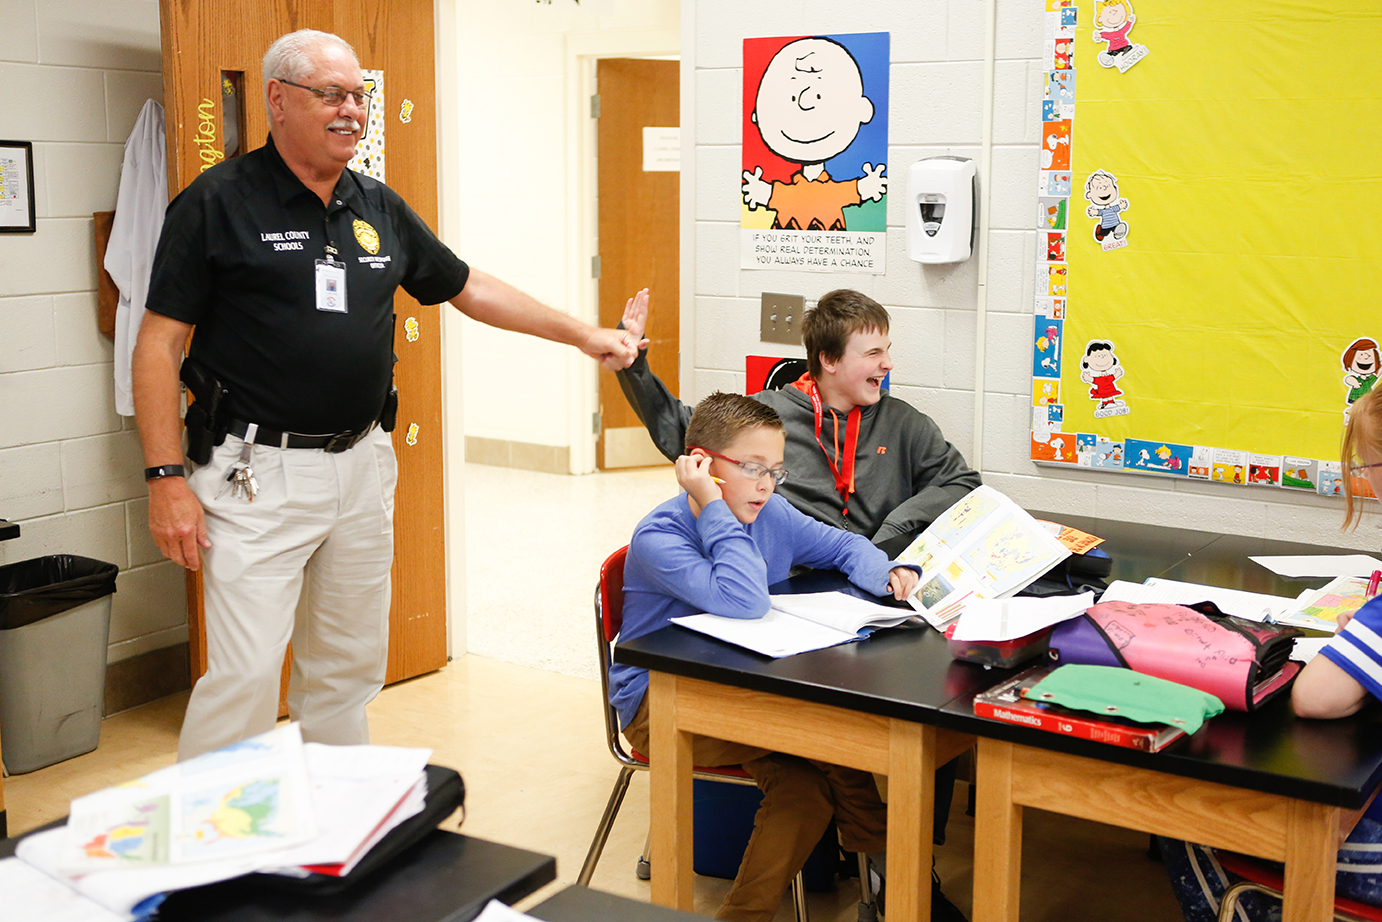 Charles Parker, a member of the Laurel County schools’ Security Response Team, high-fives a student as he drops into a class at South Laurel Middle School. Team members have quickly become accepted by the students and staff at the schools where they are assigned. Photo by Mike Marsee, Sept. 27, 2018